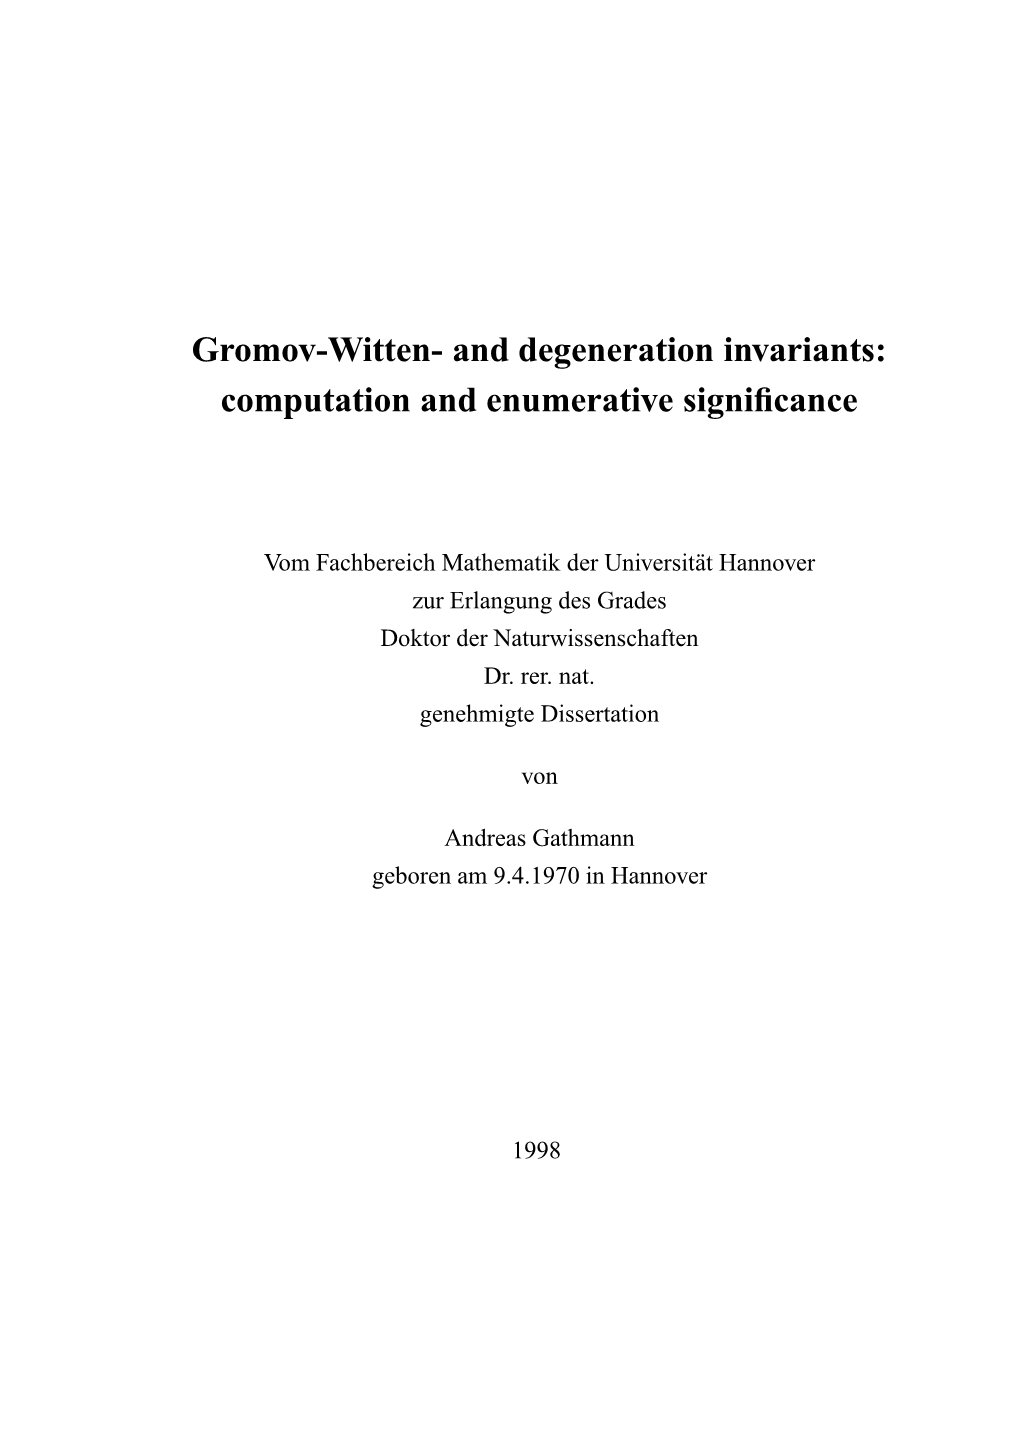 Gromov-Witten- and Degeneration Invariants: Computation and Enumerative Signiﬁcance